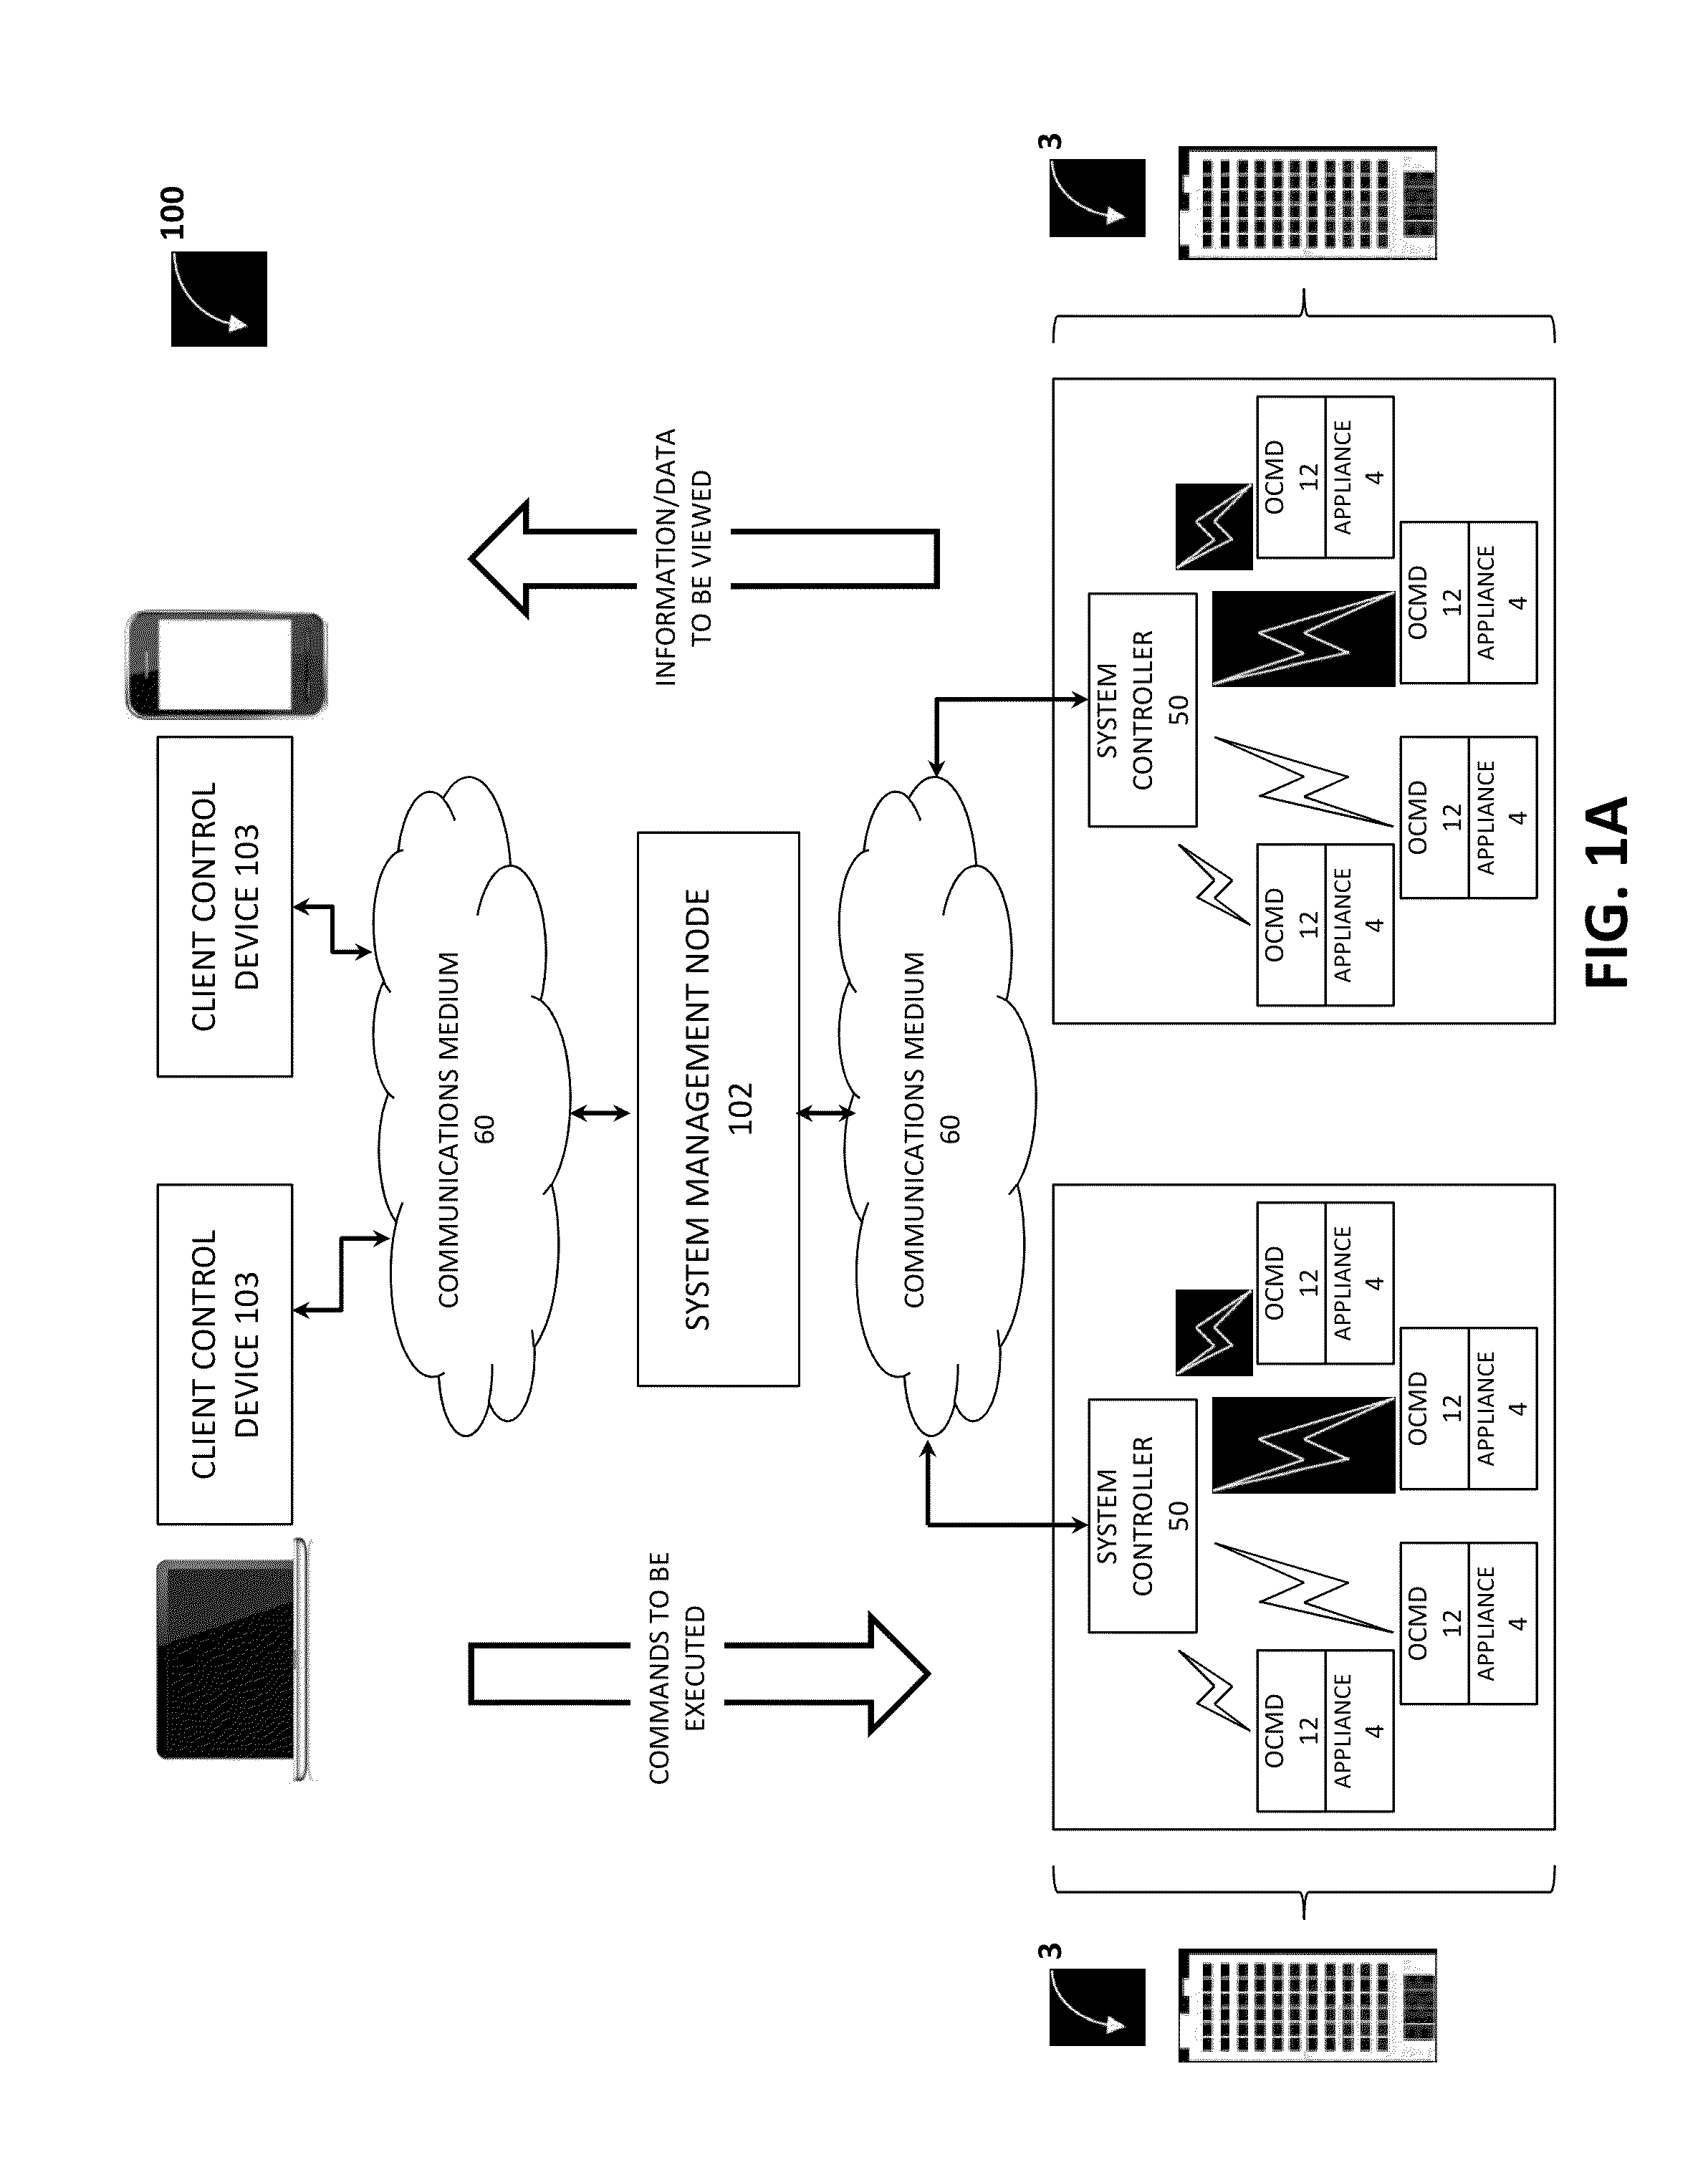 Systems and Methods for Plug Load Control and Management